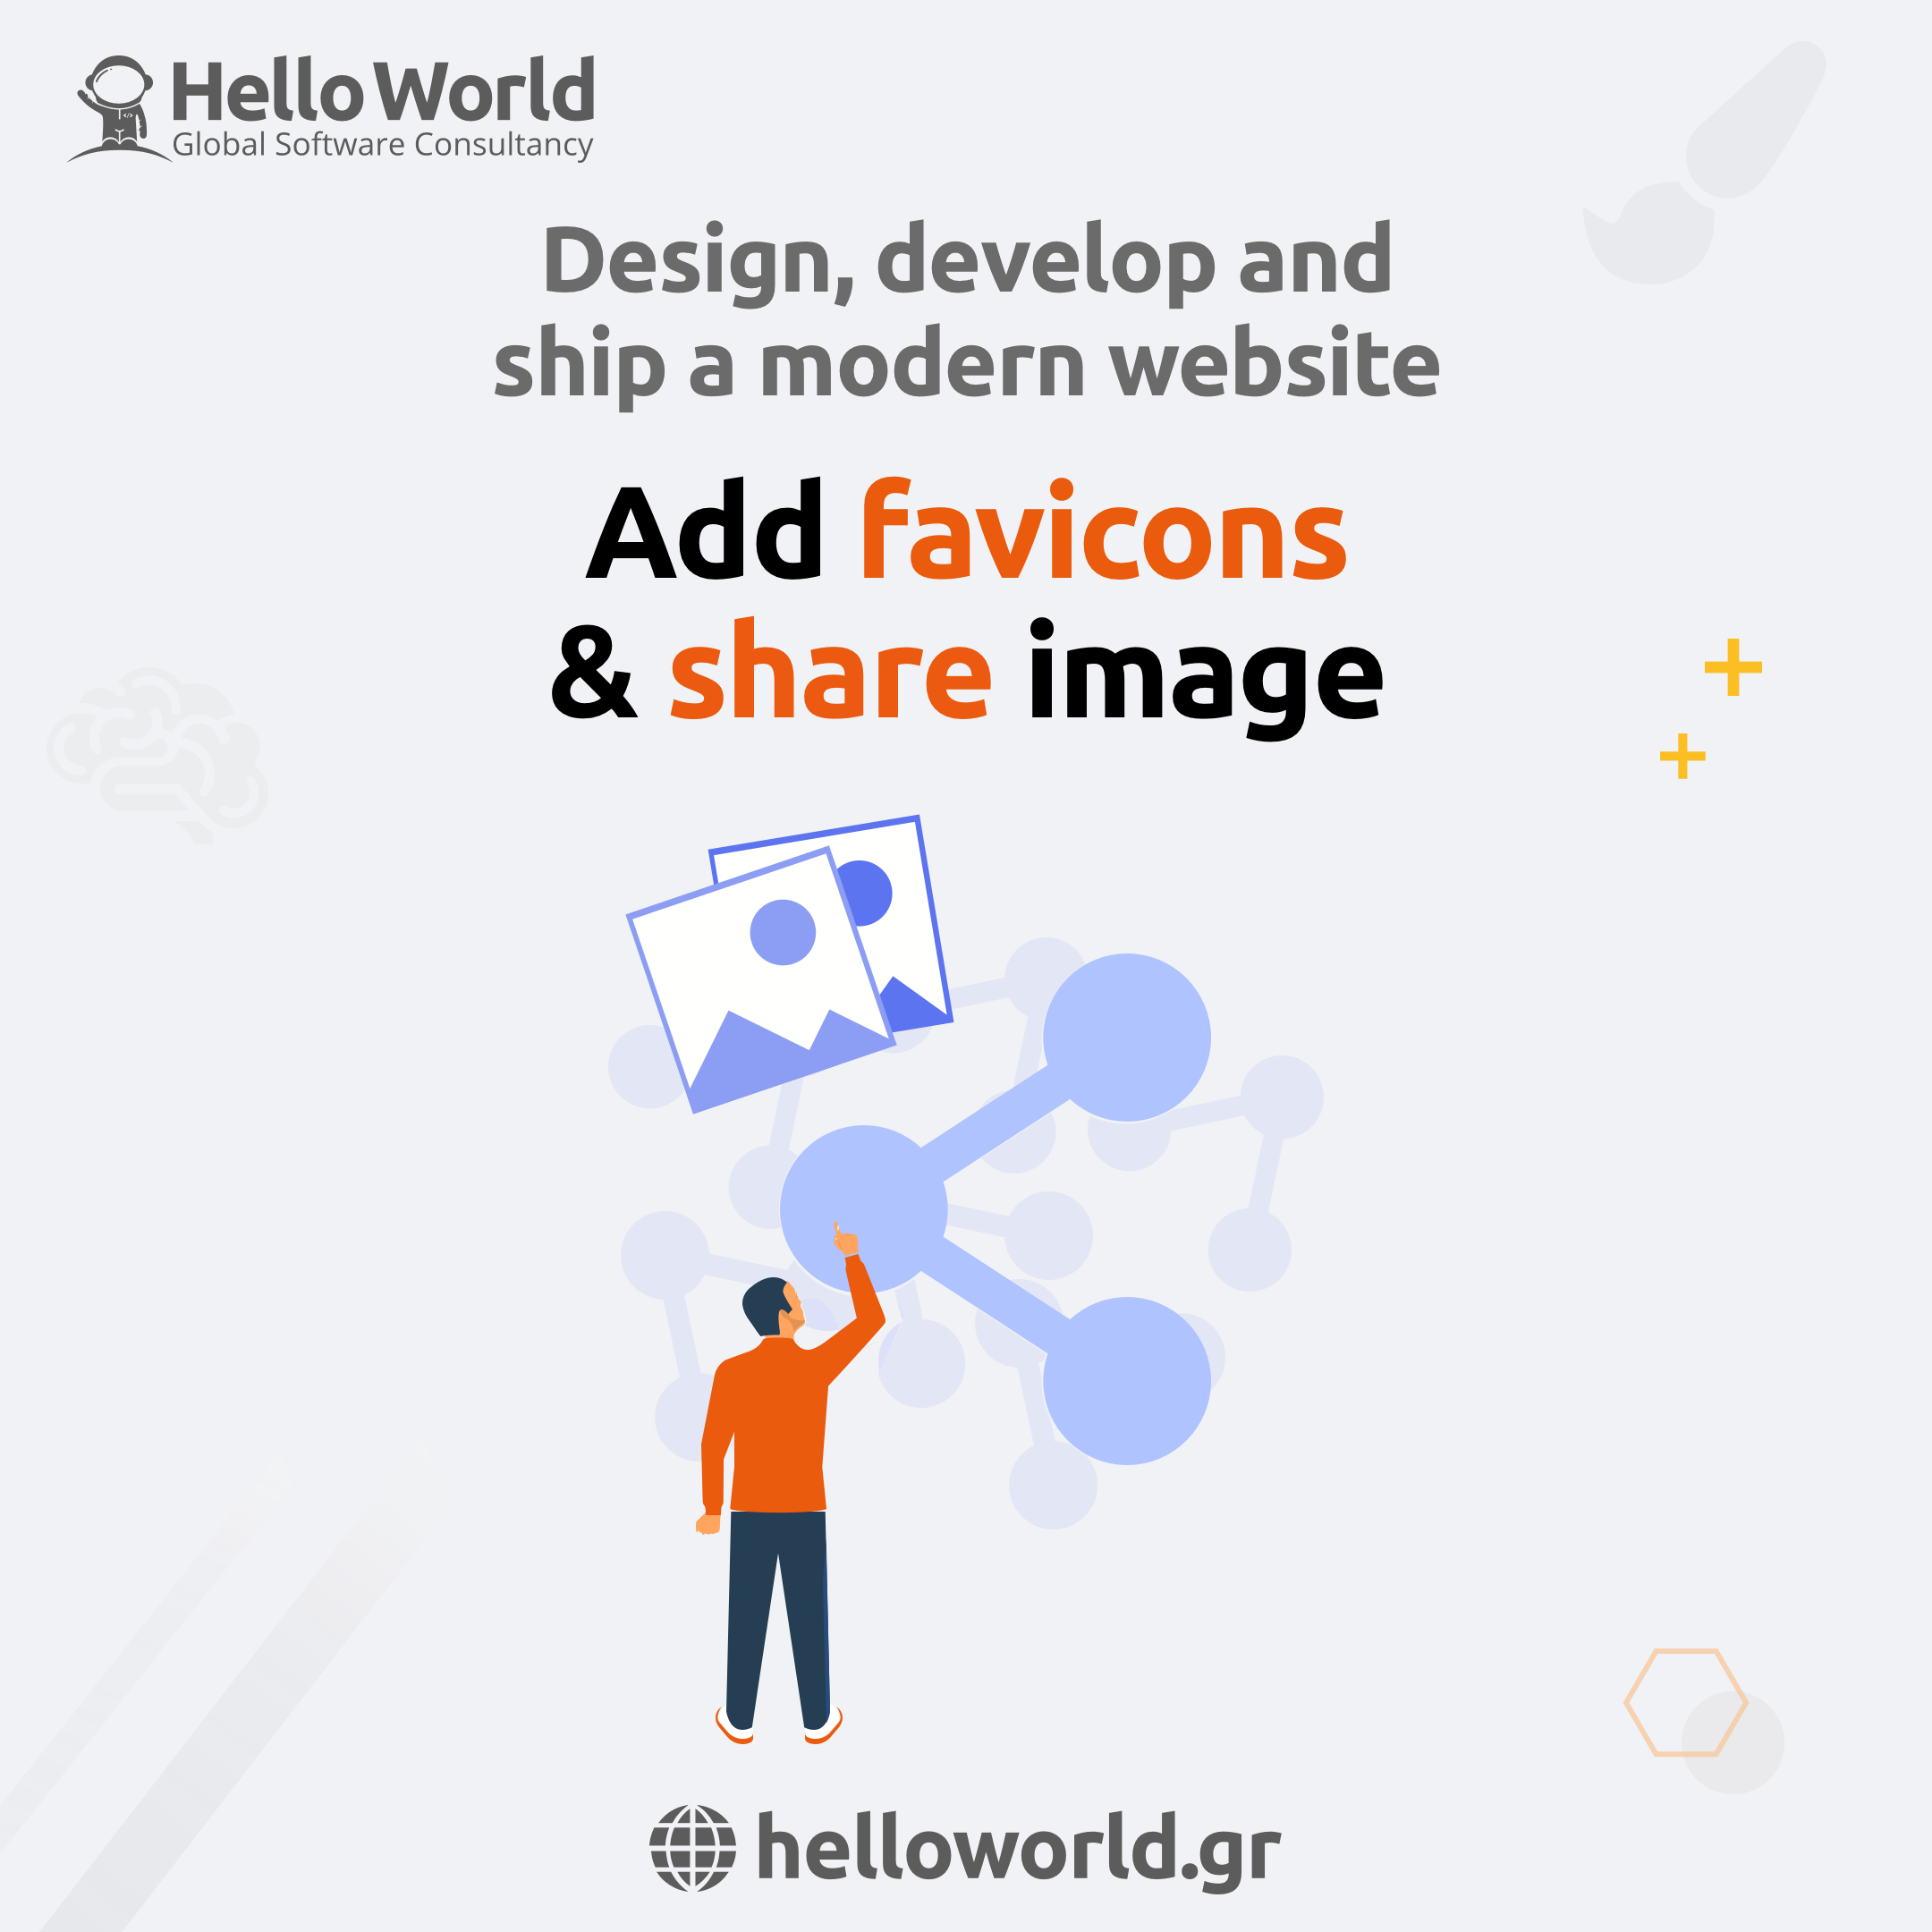 Modern Website: Add favicons and share image